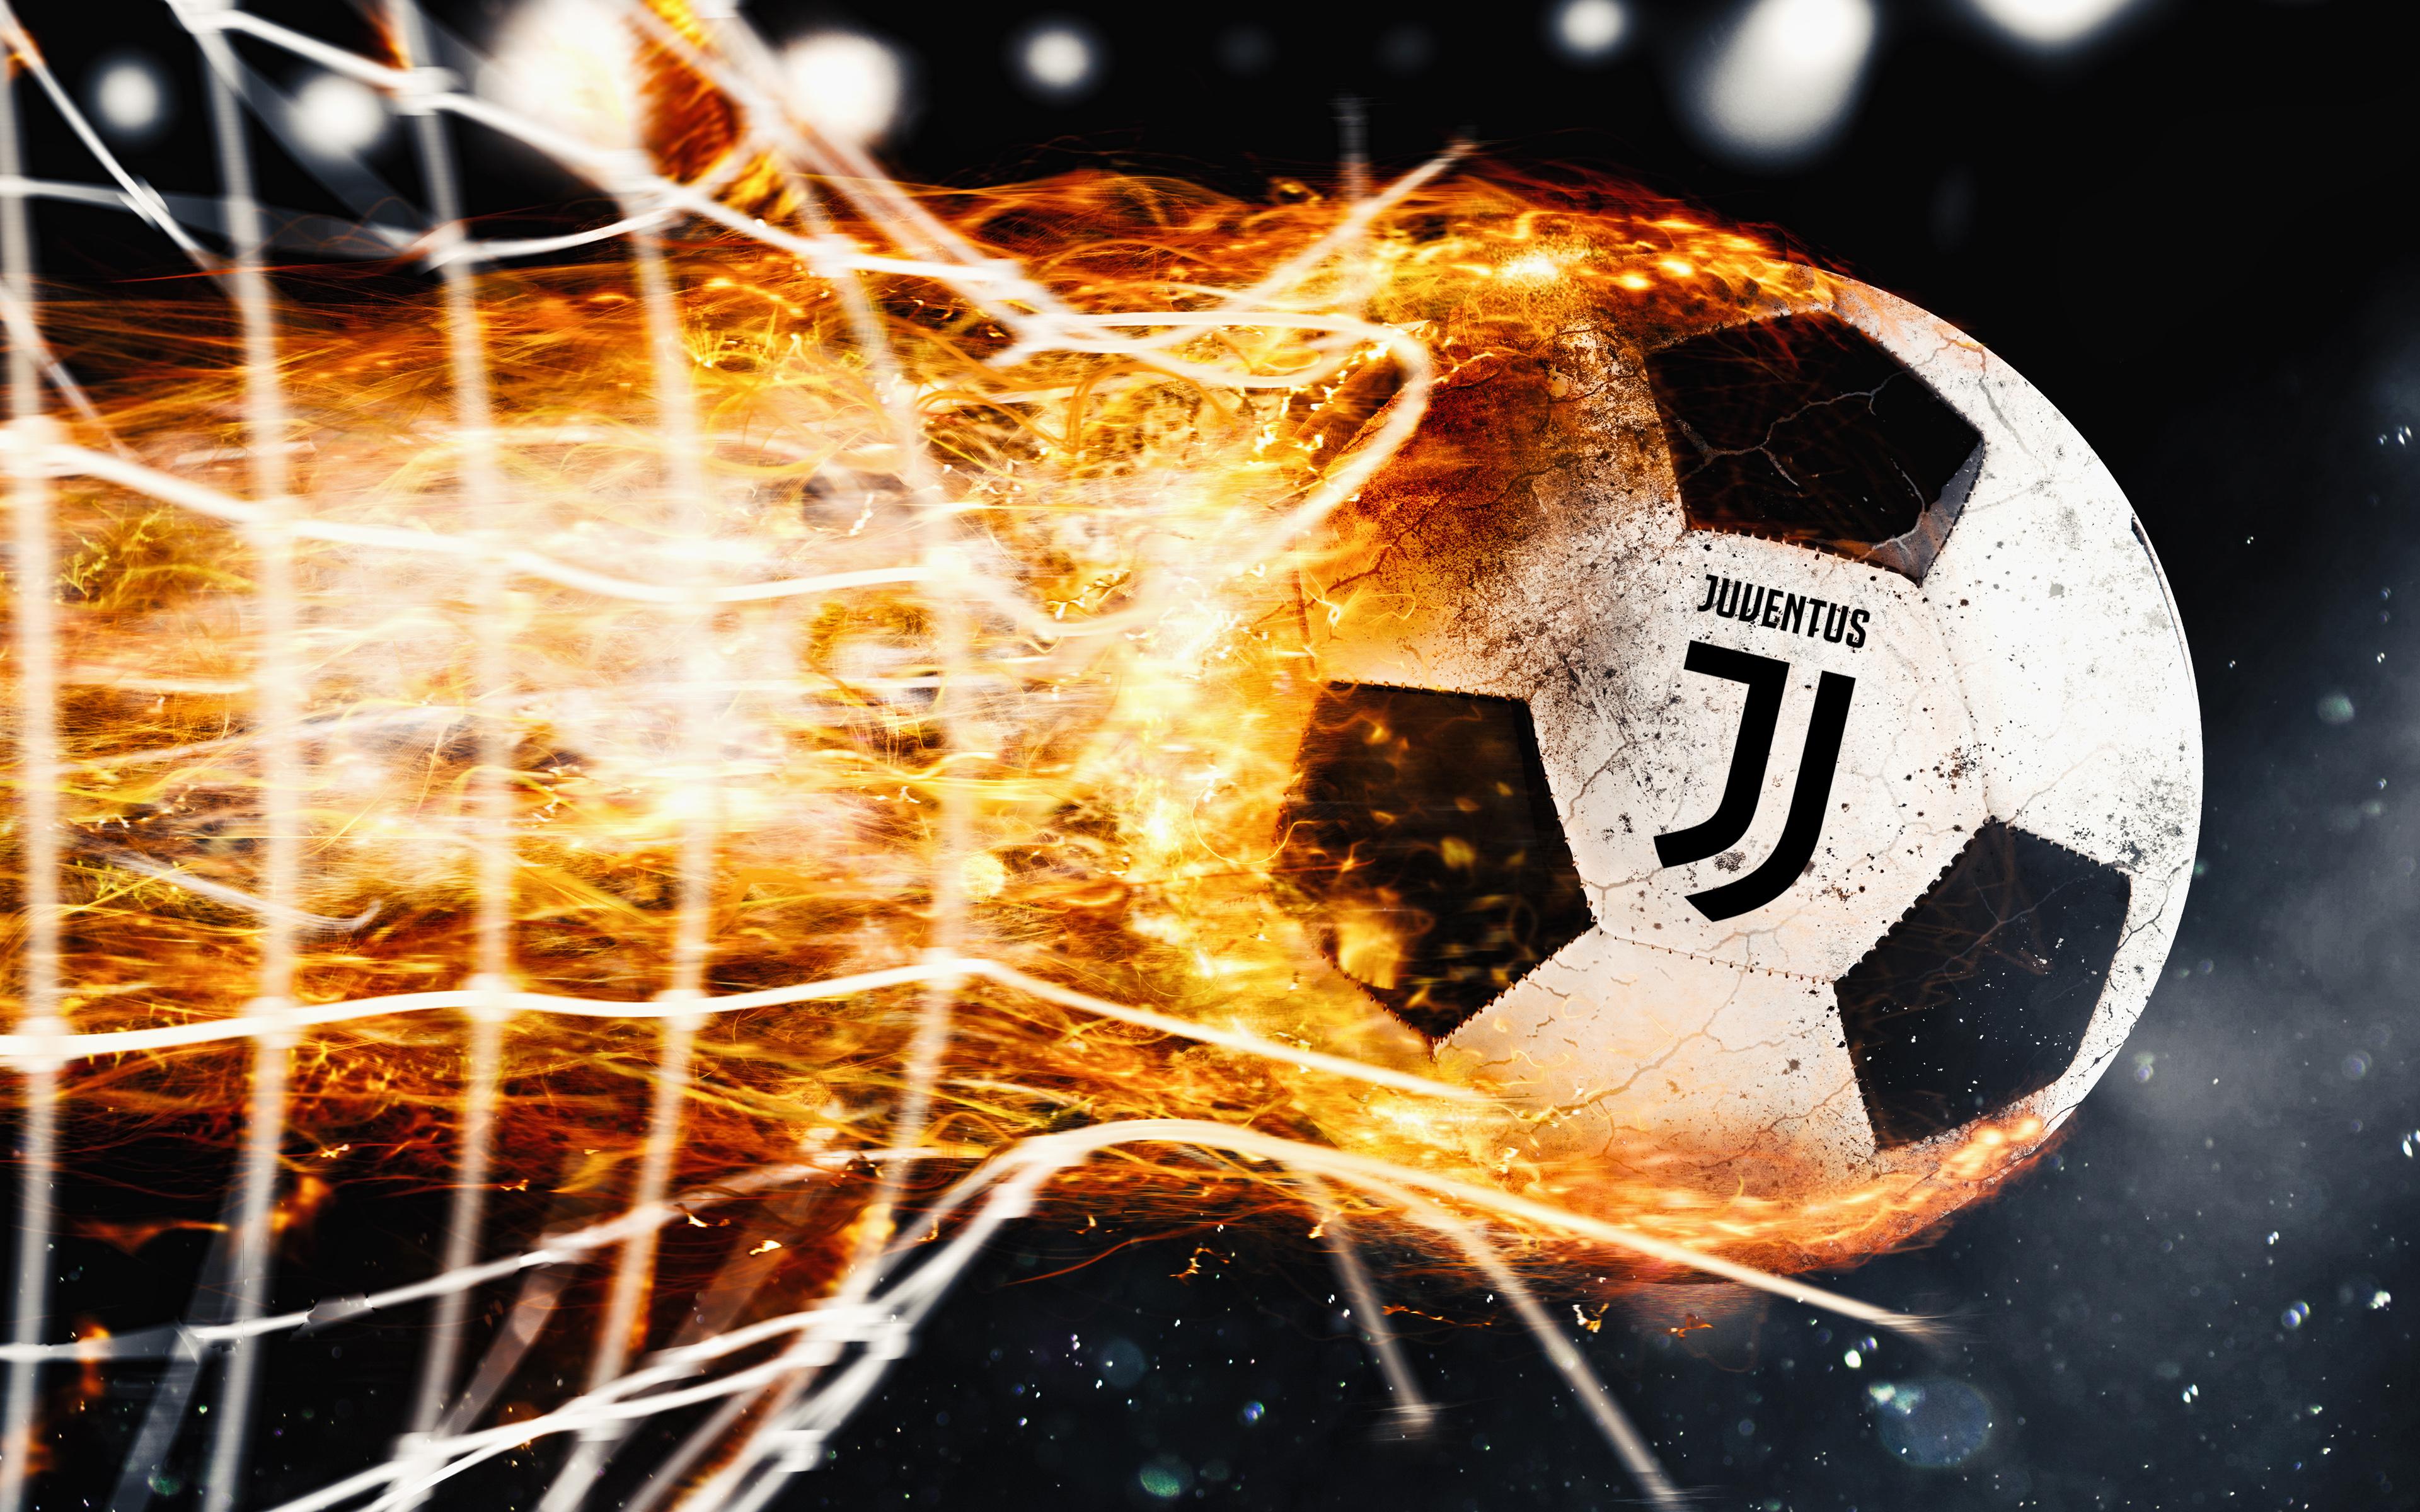 Soccer ball in ring of fire on black background Desktop wallpapers 1920x1200